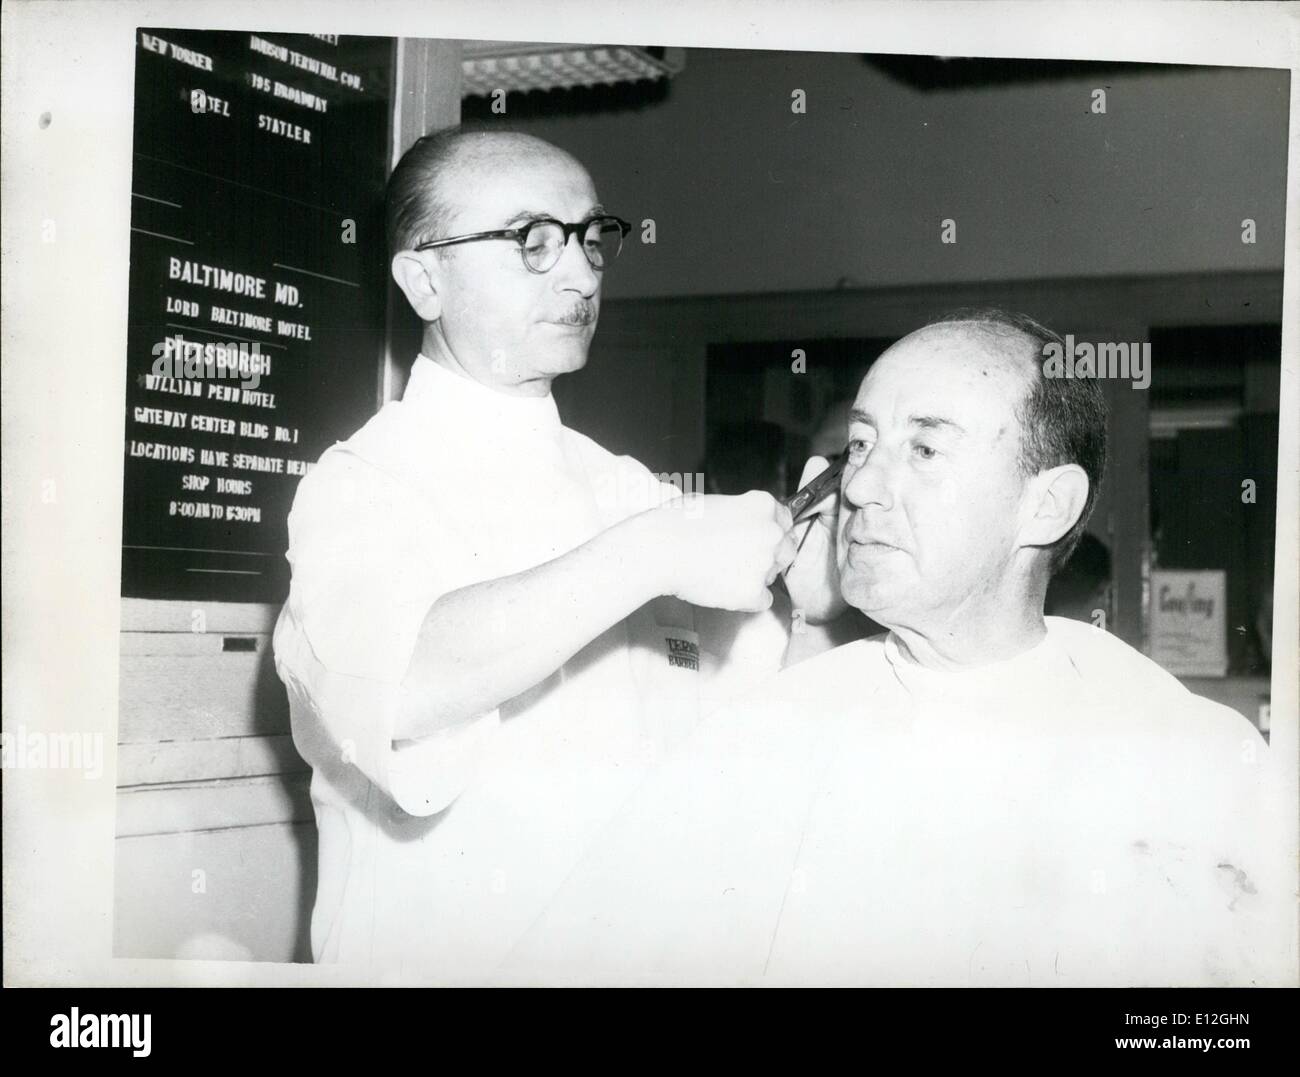 Dec. 26, 2011 - Adlai Stevenson between two engagements during the 1952 election campaign takes a haircut in the RR terminal barbershop. Stock Photo